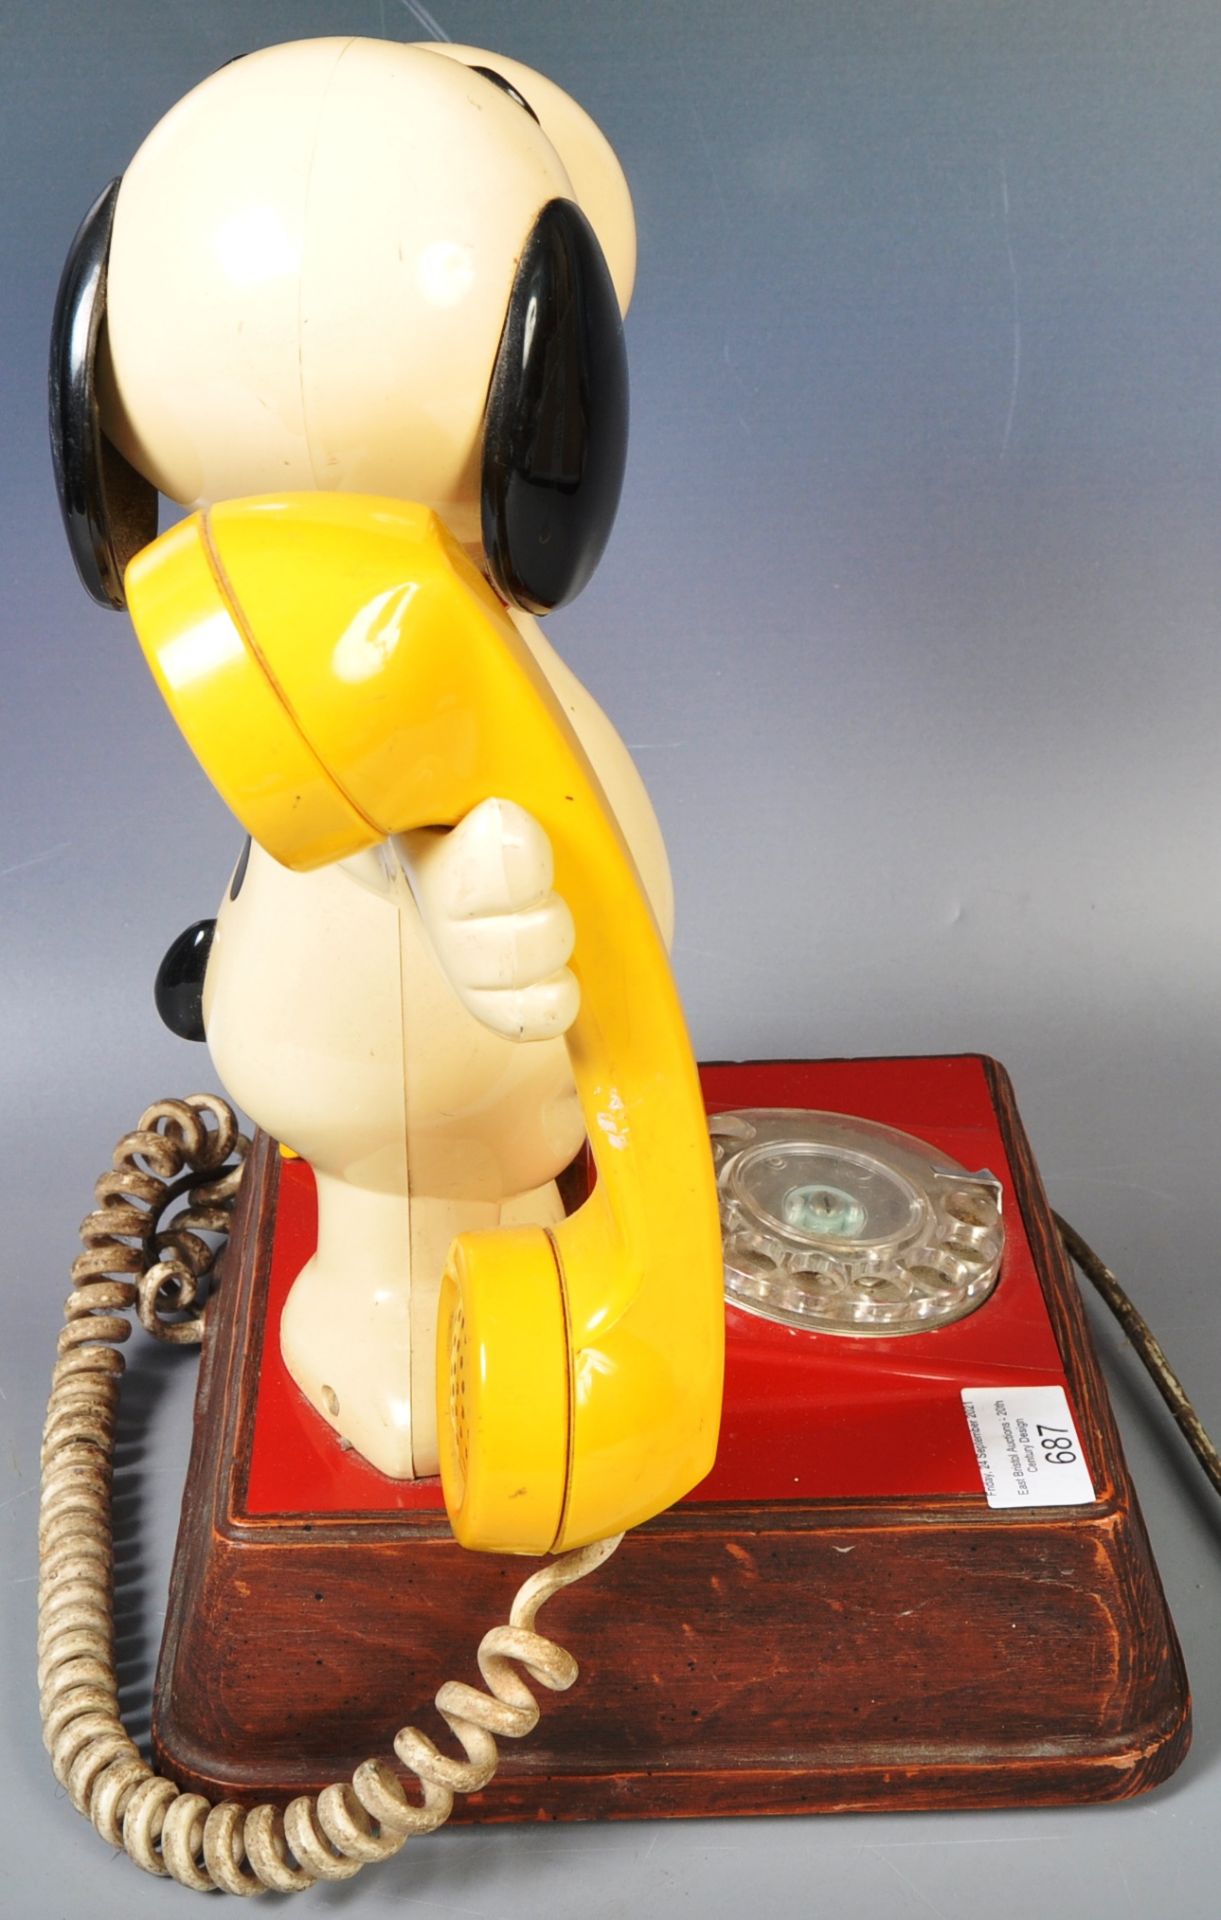 RETRO 1970'S NOVELTY SNOOPY DIAL TELEPHONE - Image 4 of 7